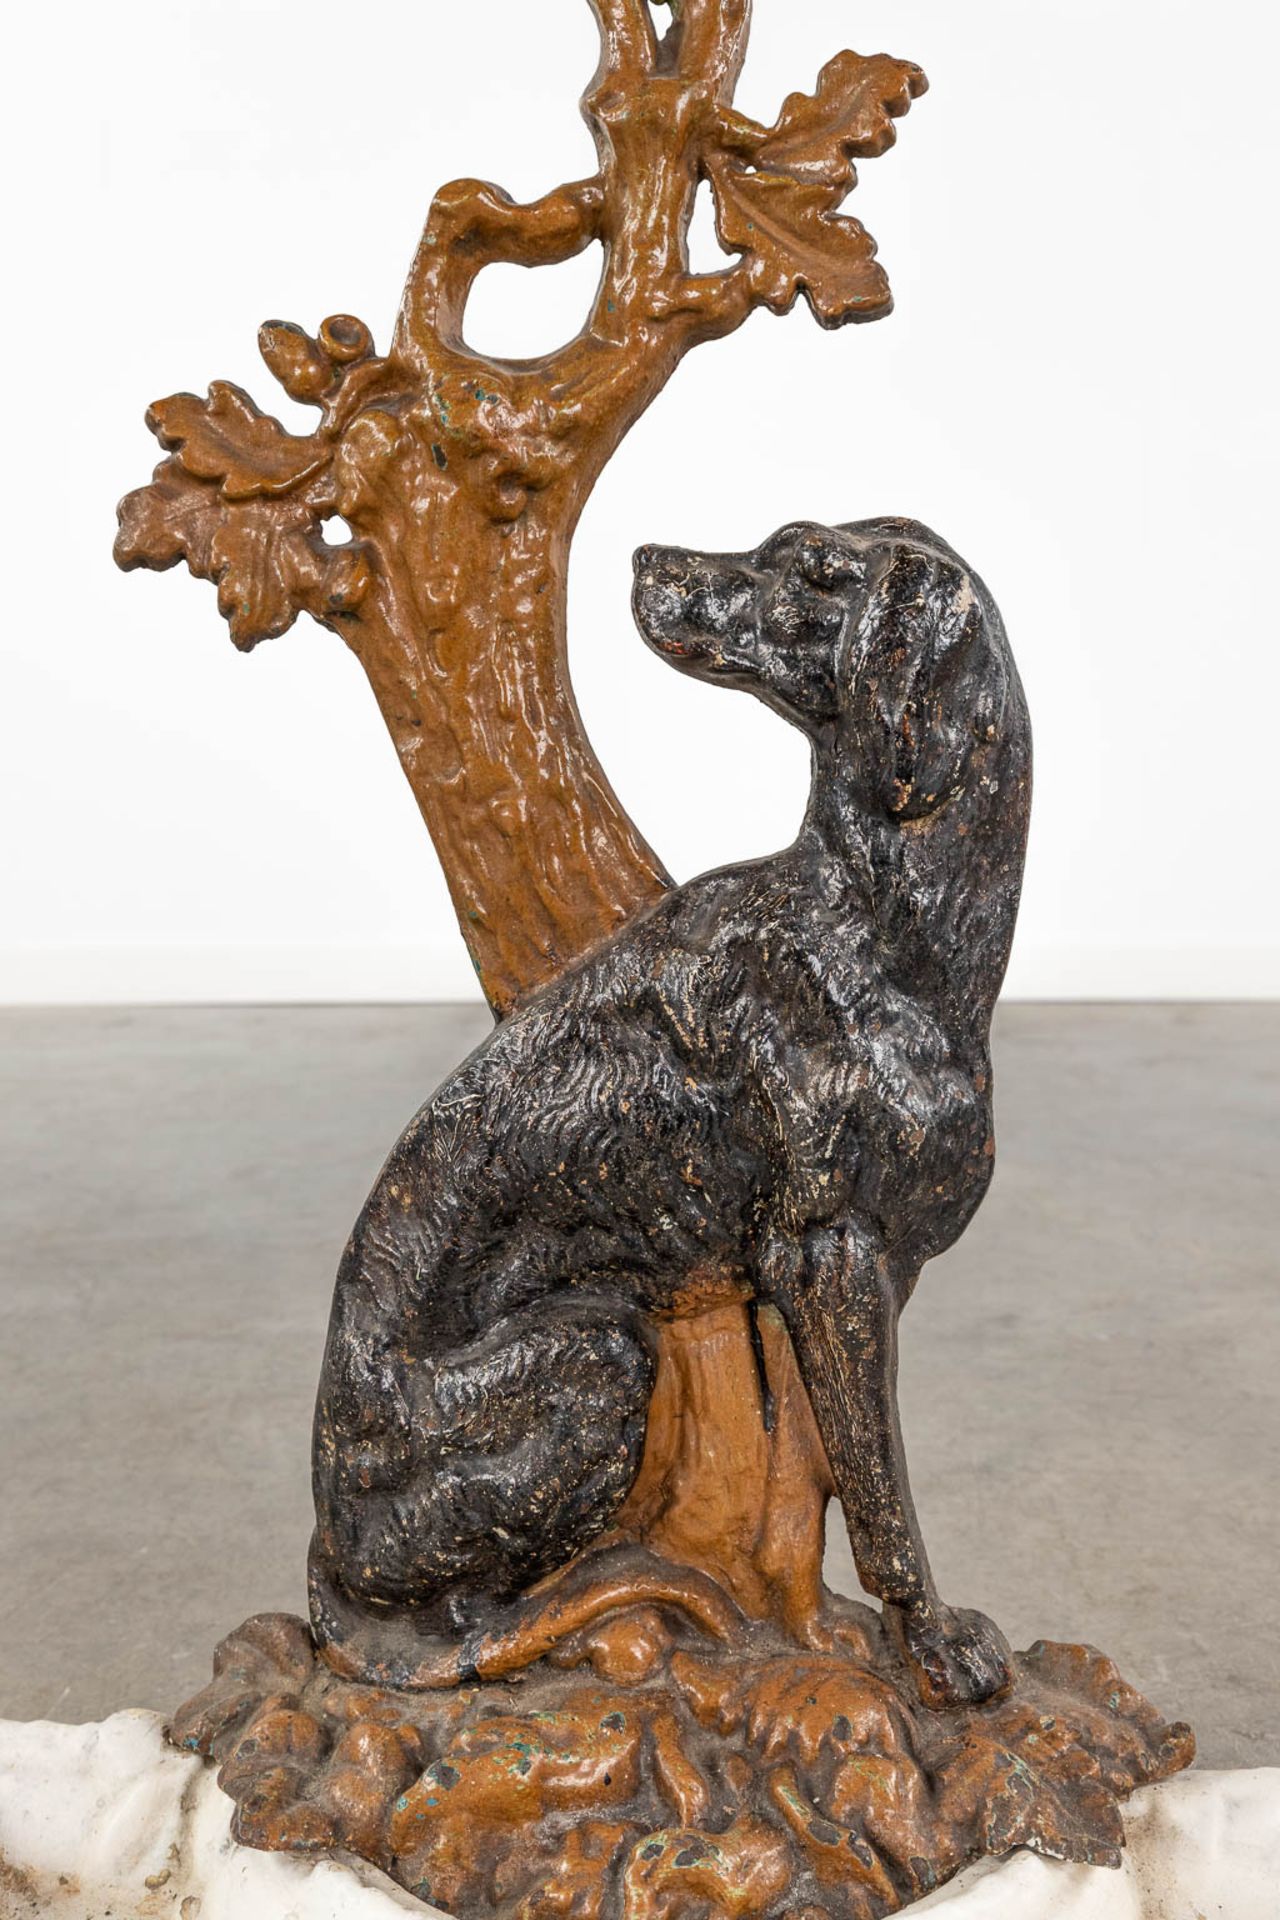 An umbrella stand, cast iron with a figurine of a dog. Circa 1900. (L: 23 x W: 44 x H: 72 cm) - Image 8 of 10